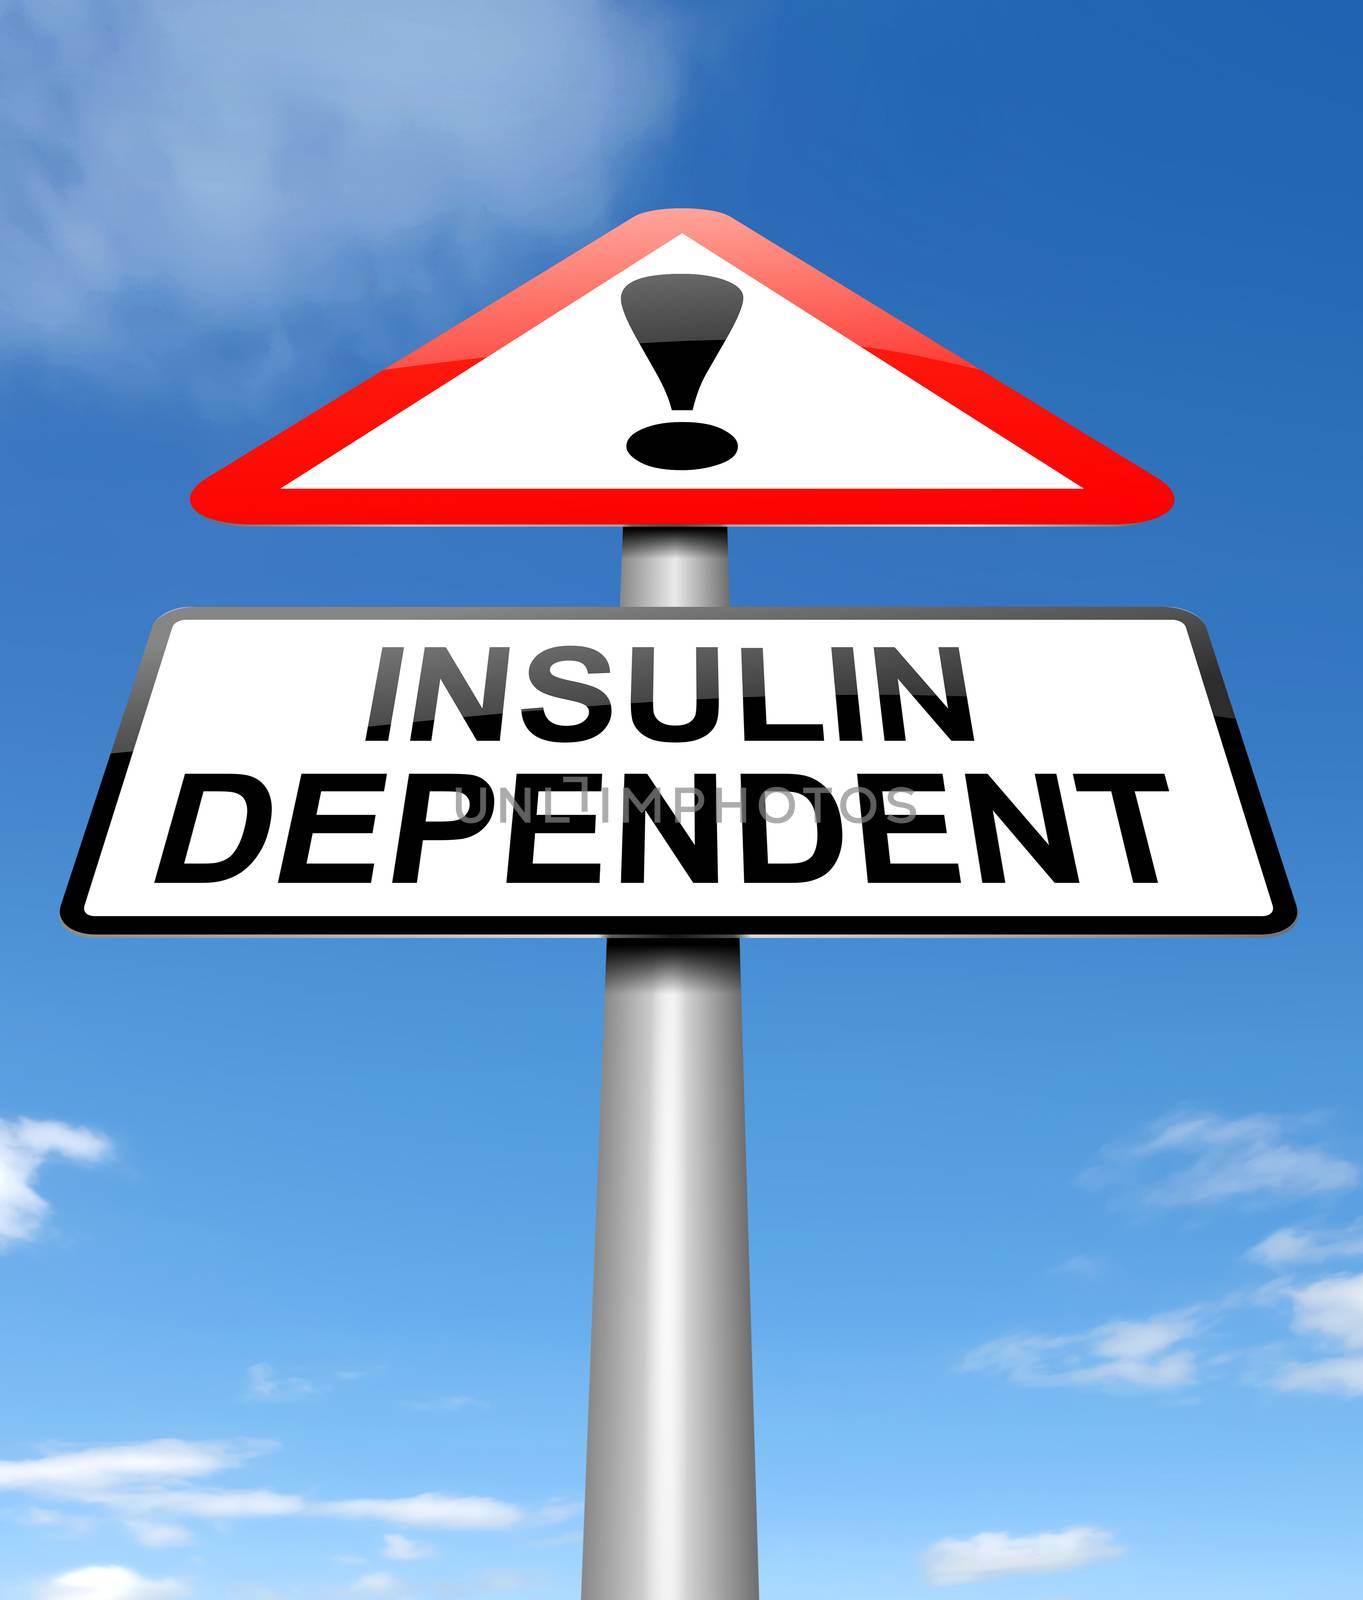 Insulin dependency concept. by 72soul